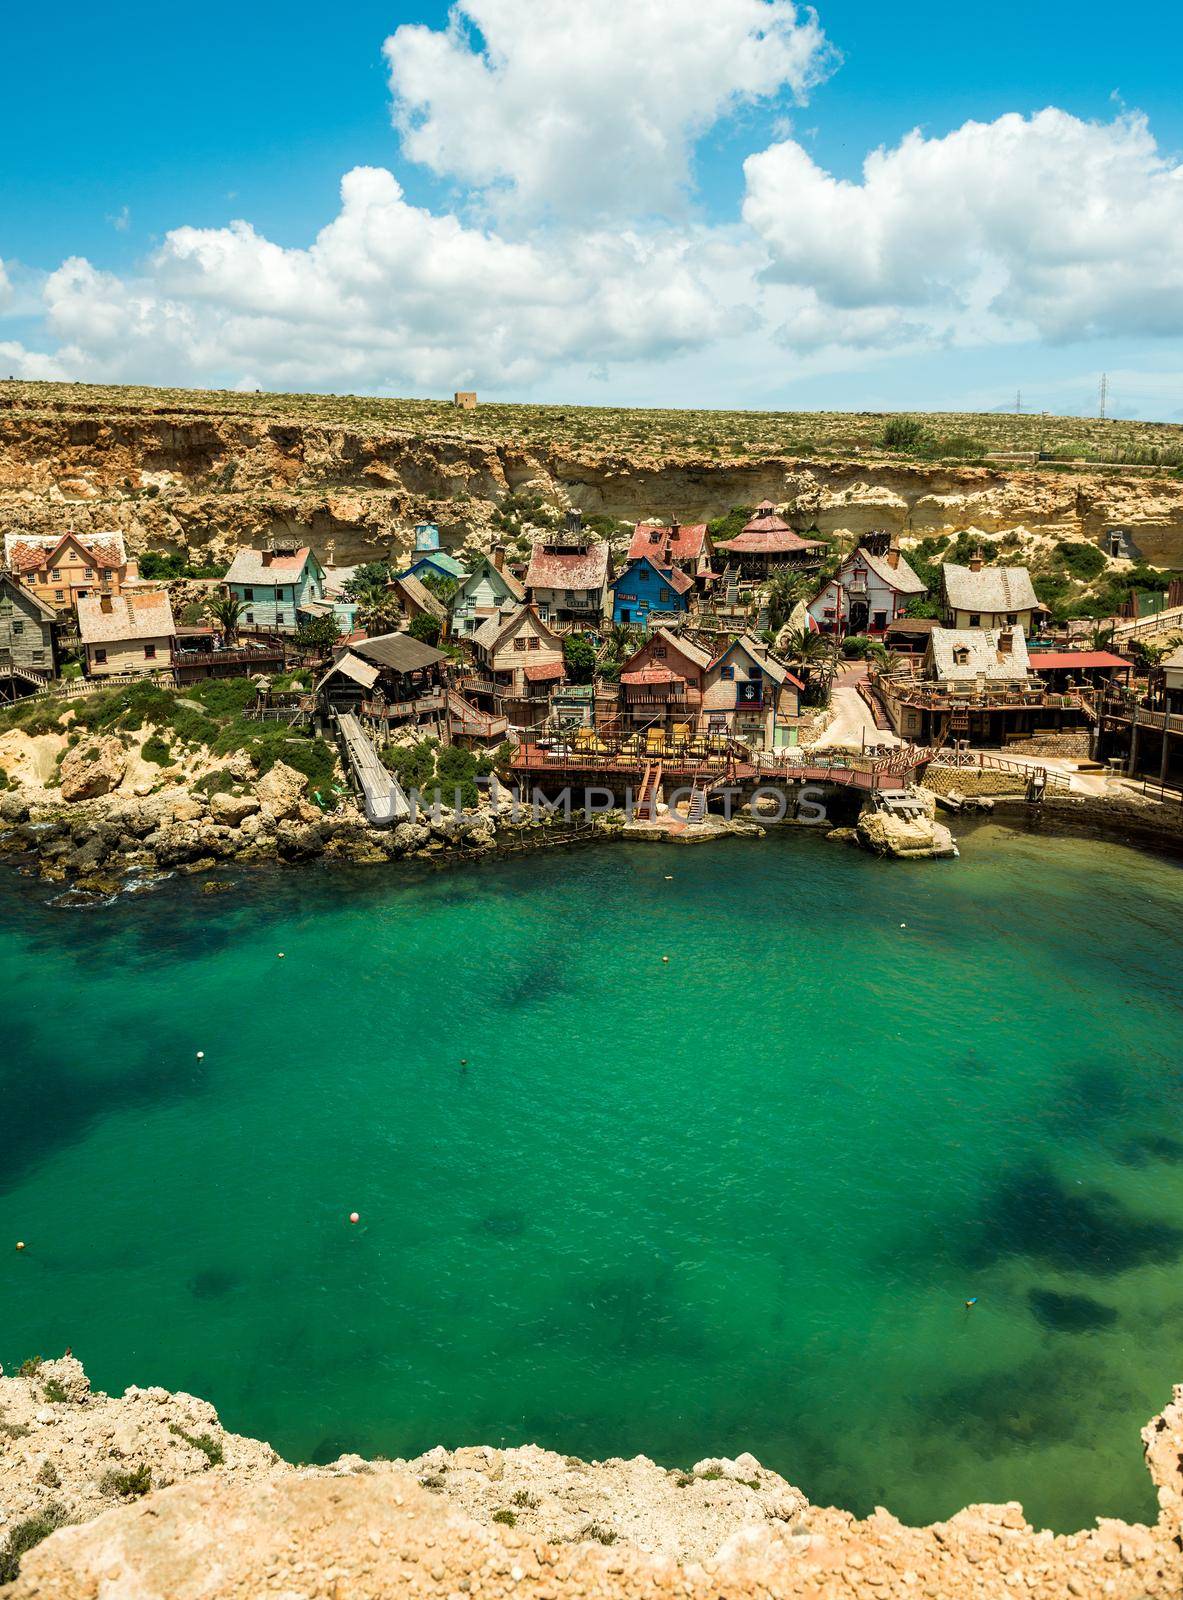 Mellieha, Malta - 23 May 2015: Popeye Village. Popeye Village was used as the set for Robert Altman's movie Popeye and is now in use as an amusement park.